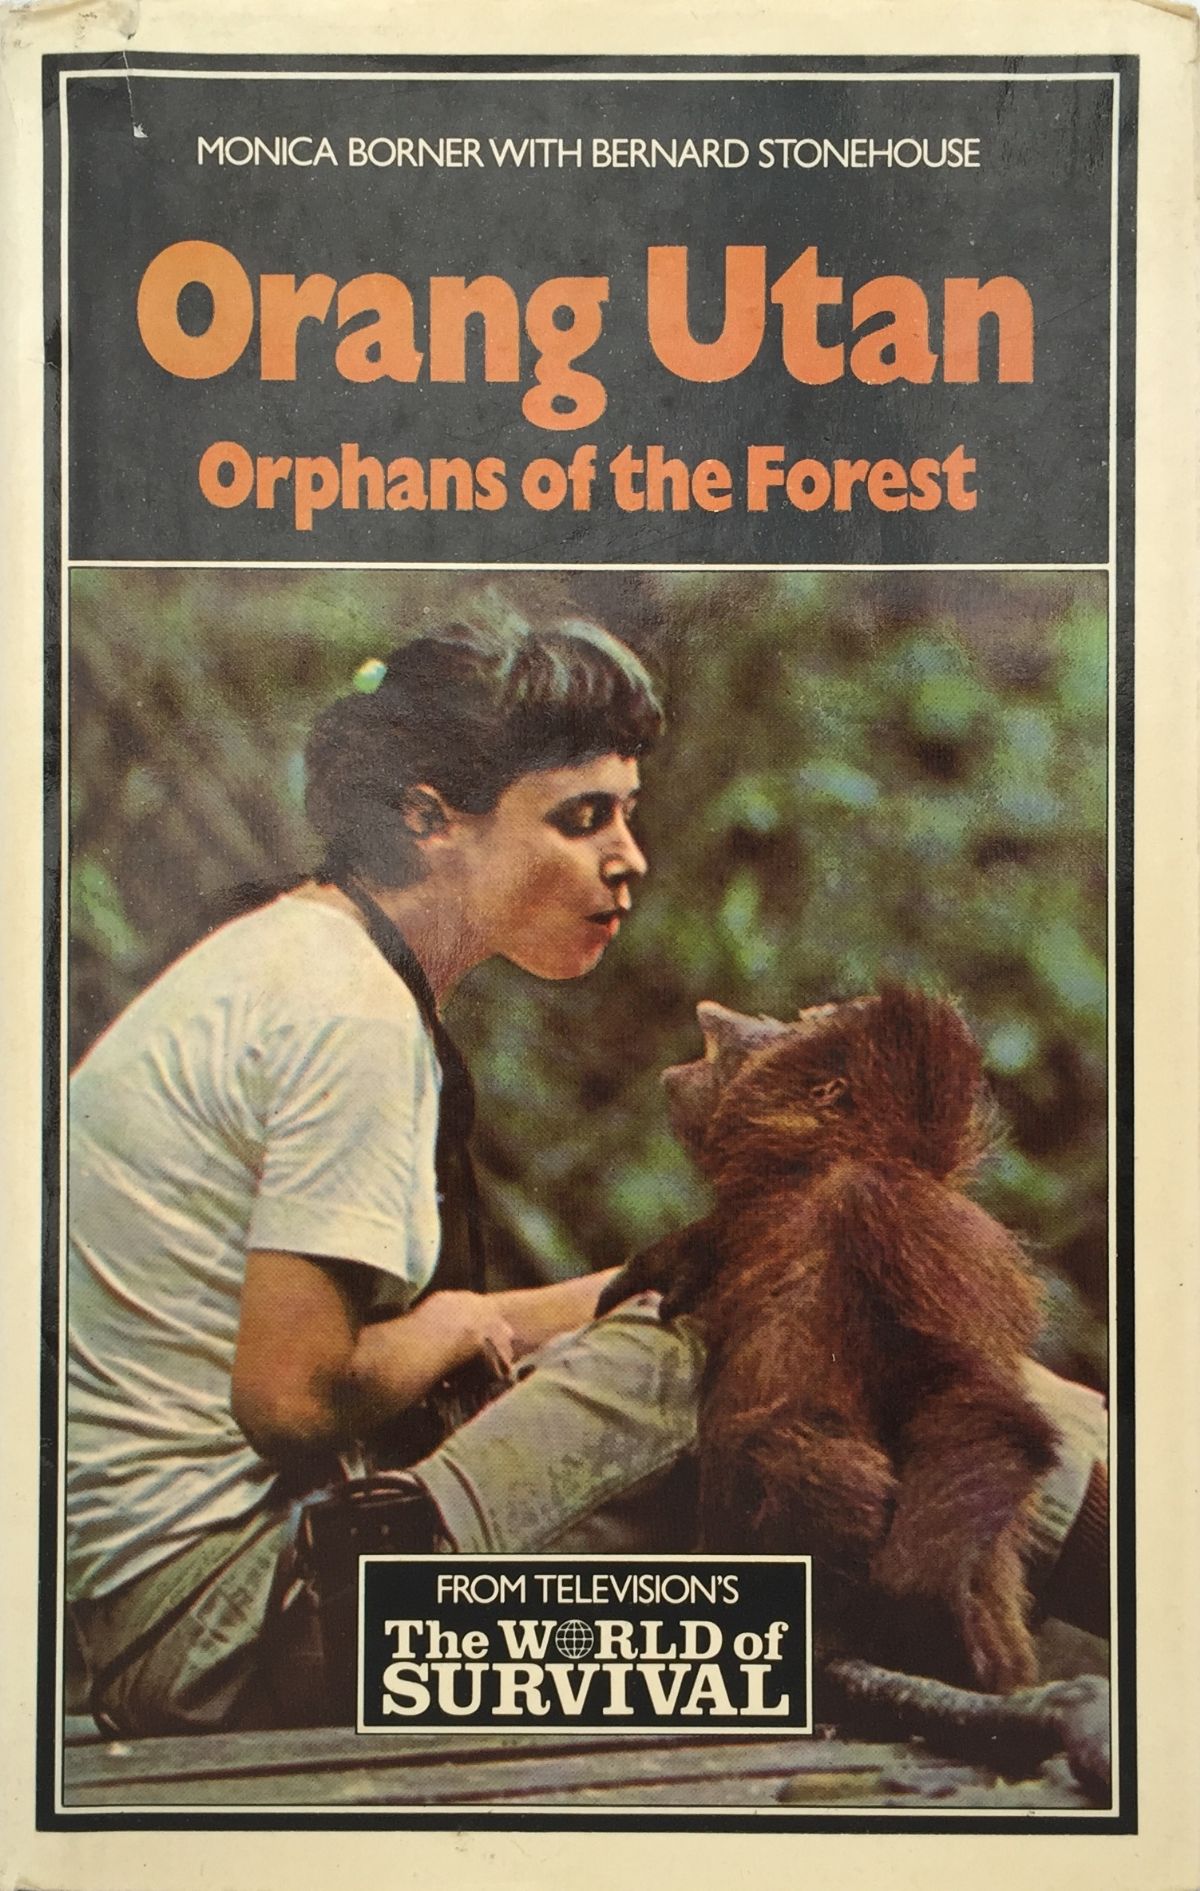 ORANG UTAN: Orphans of the Forest